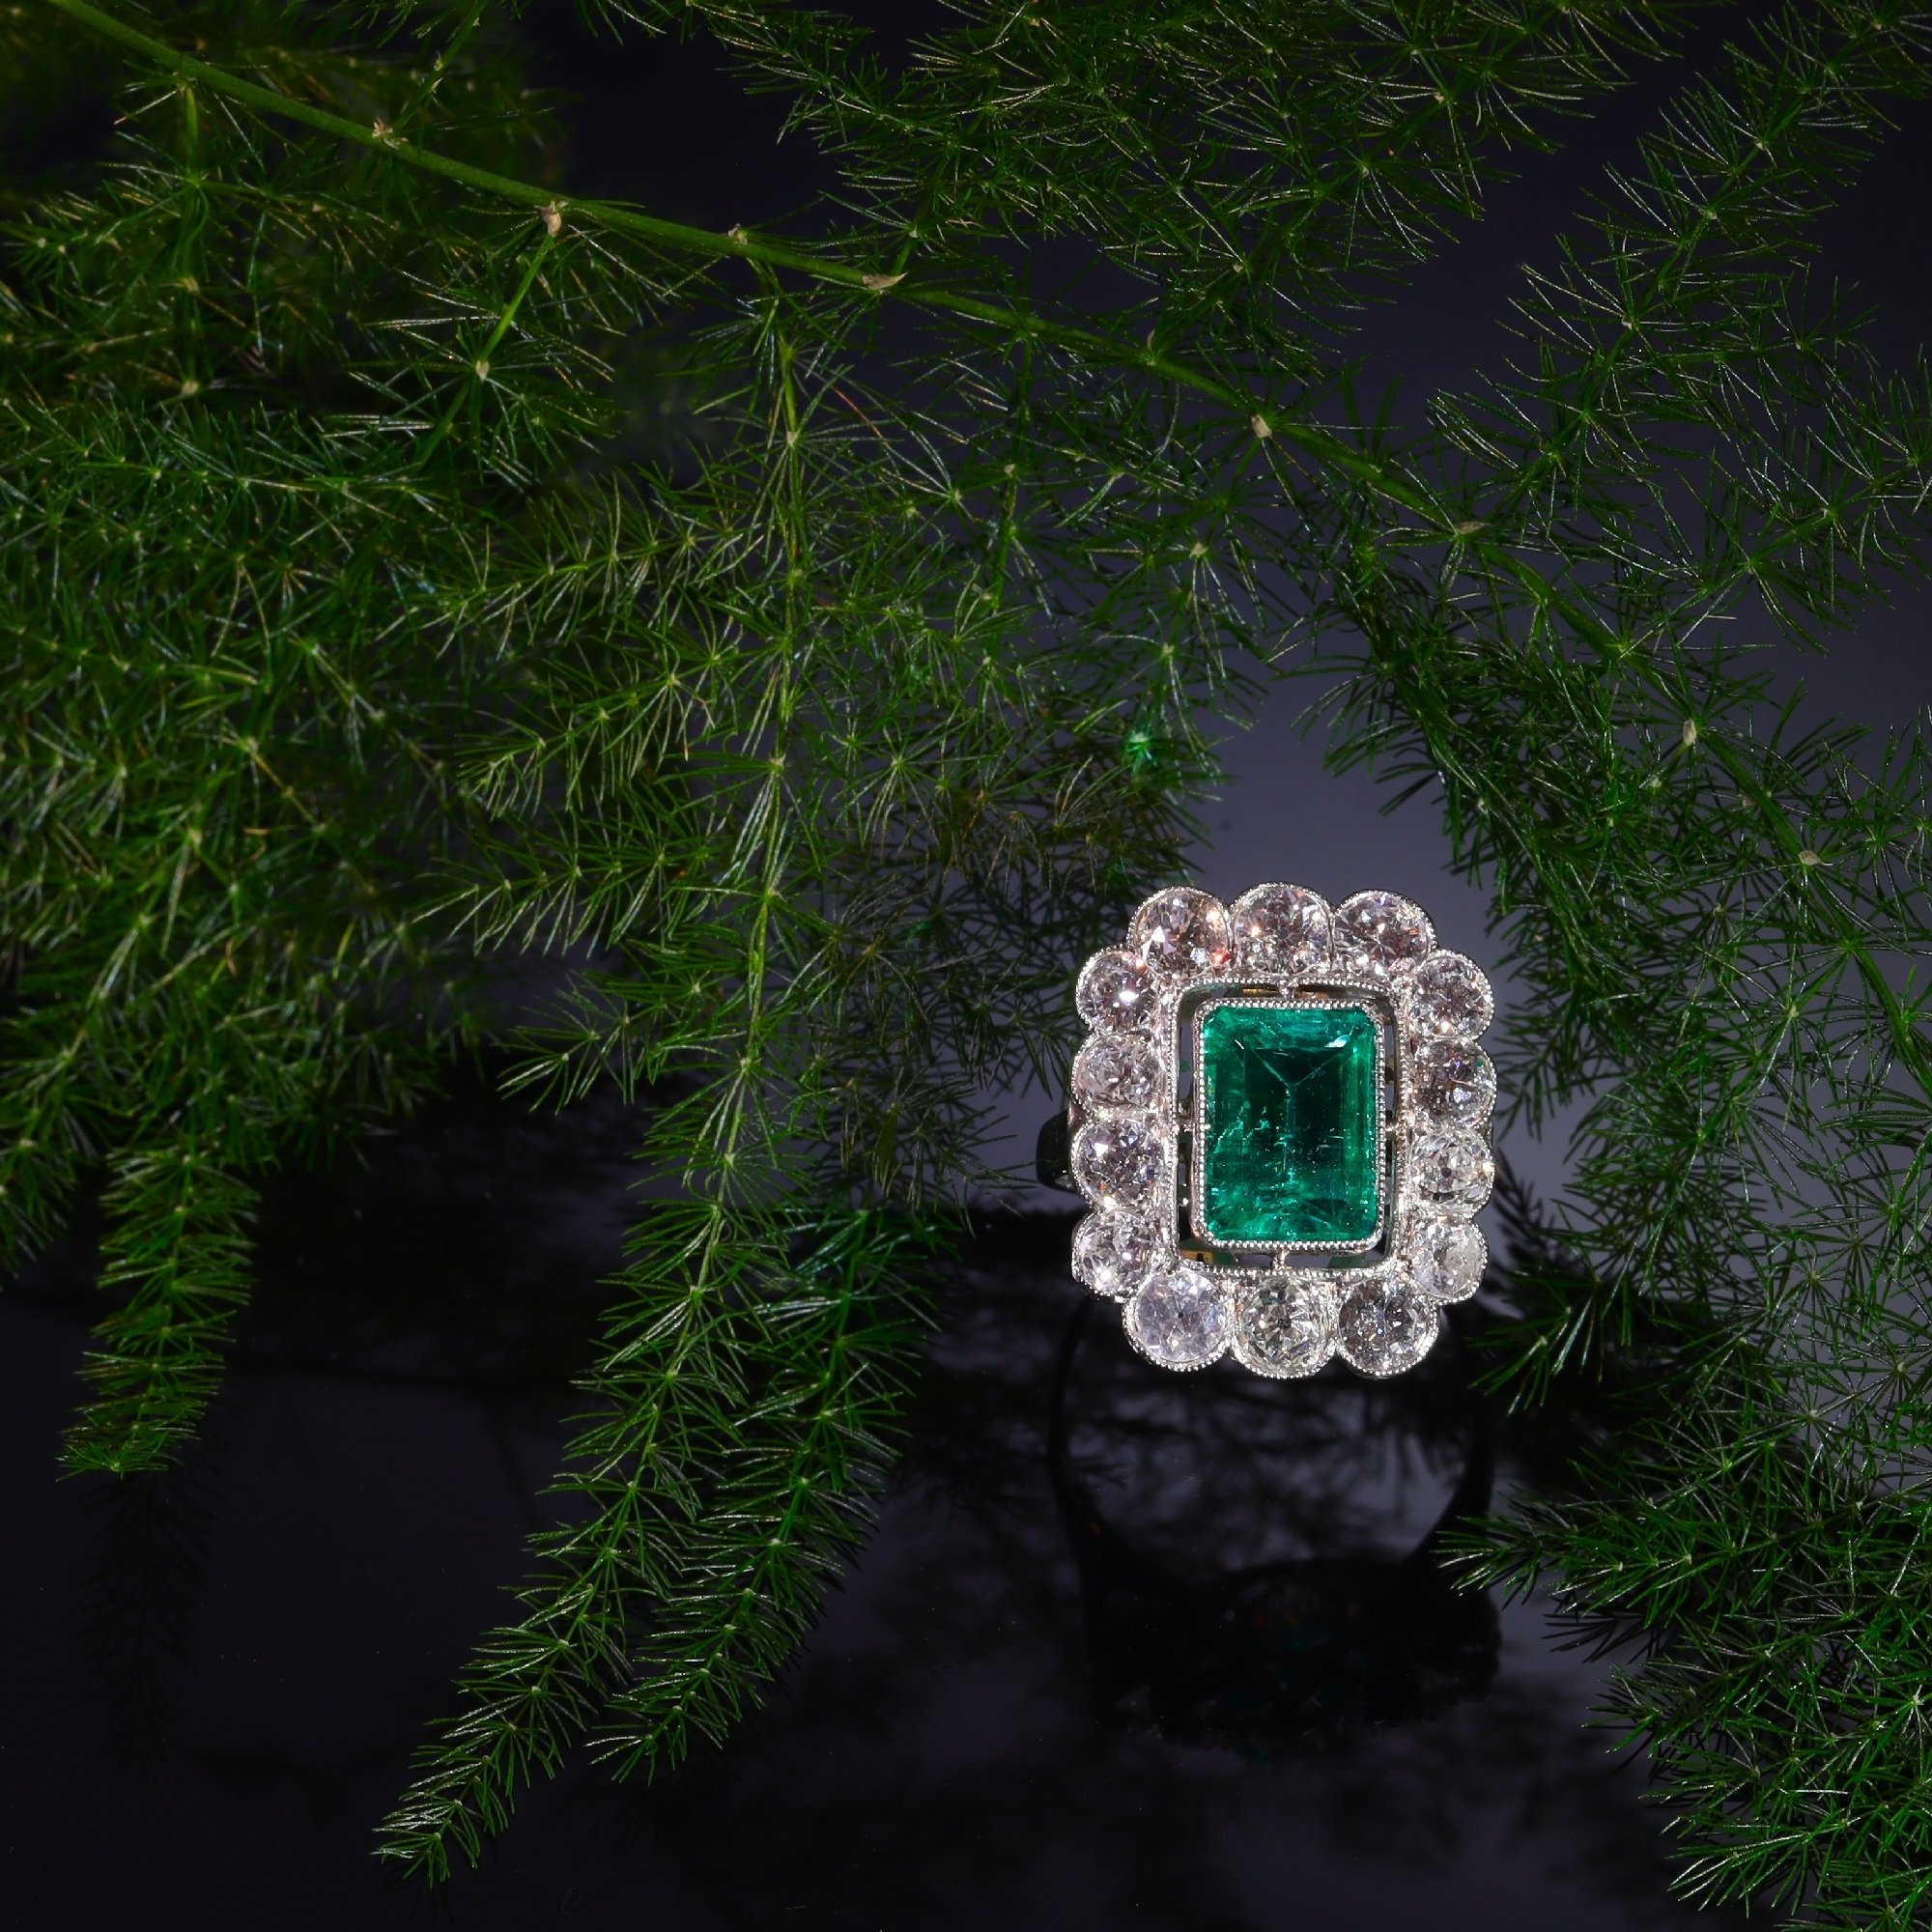 Click the picture to see more of this Vintage Fifties platinum diamond ring with untreated natural emerald